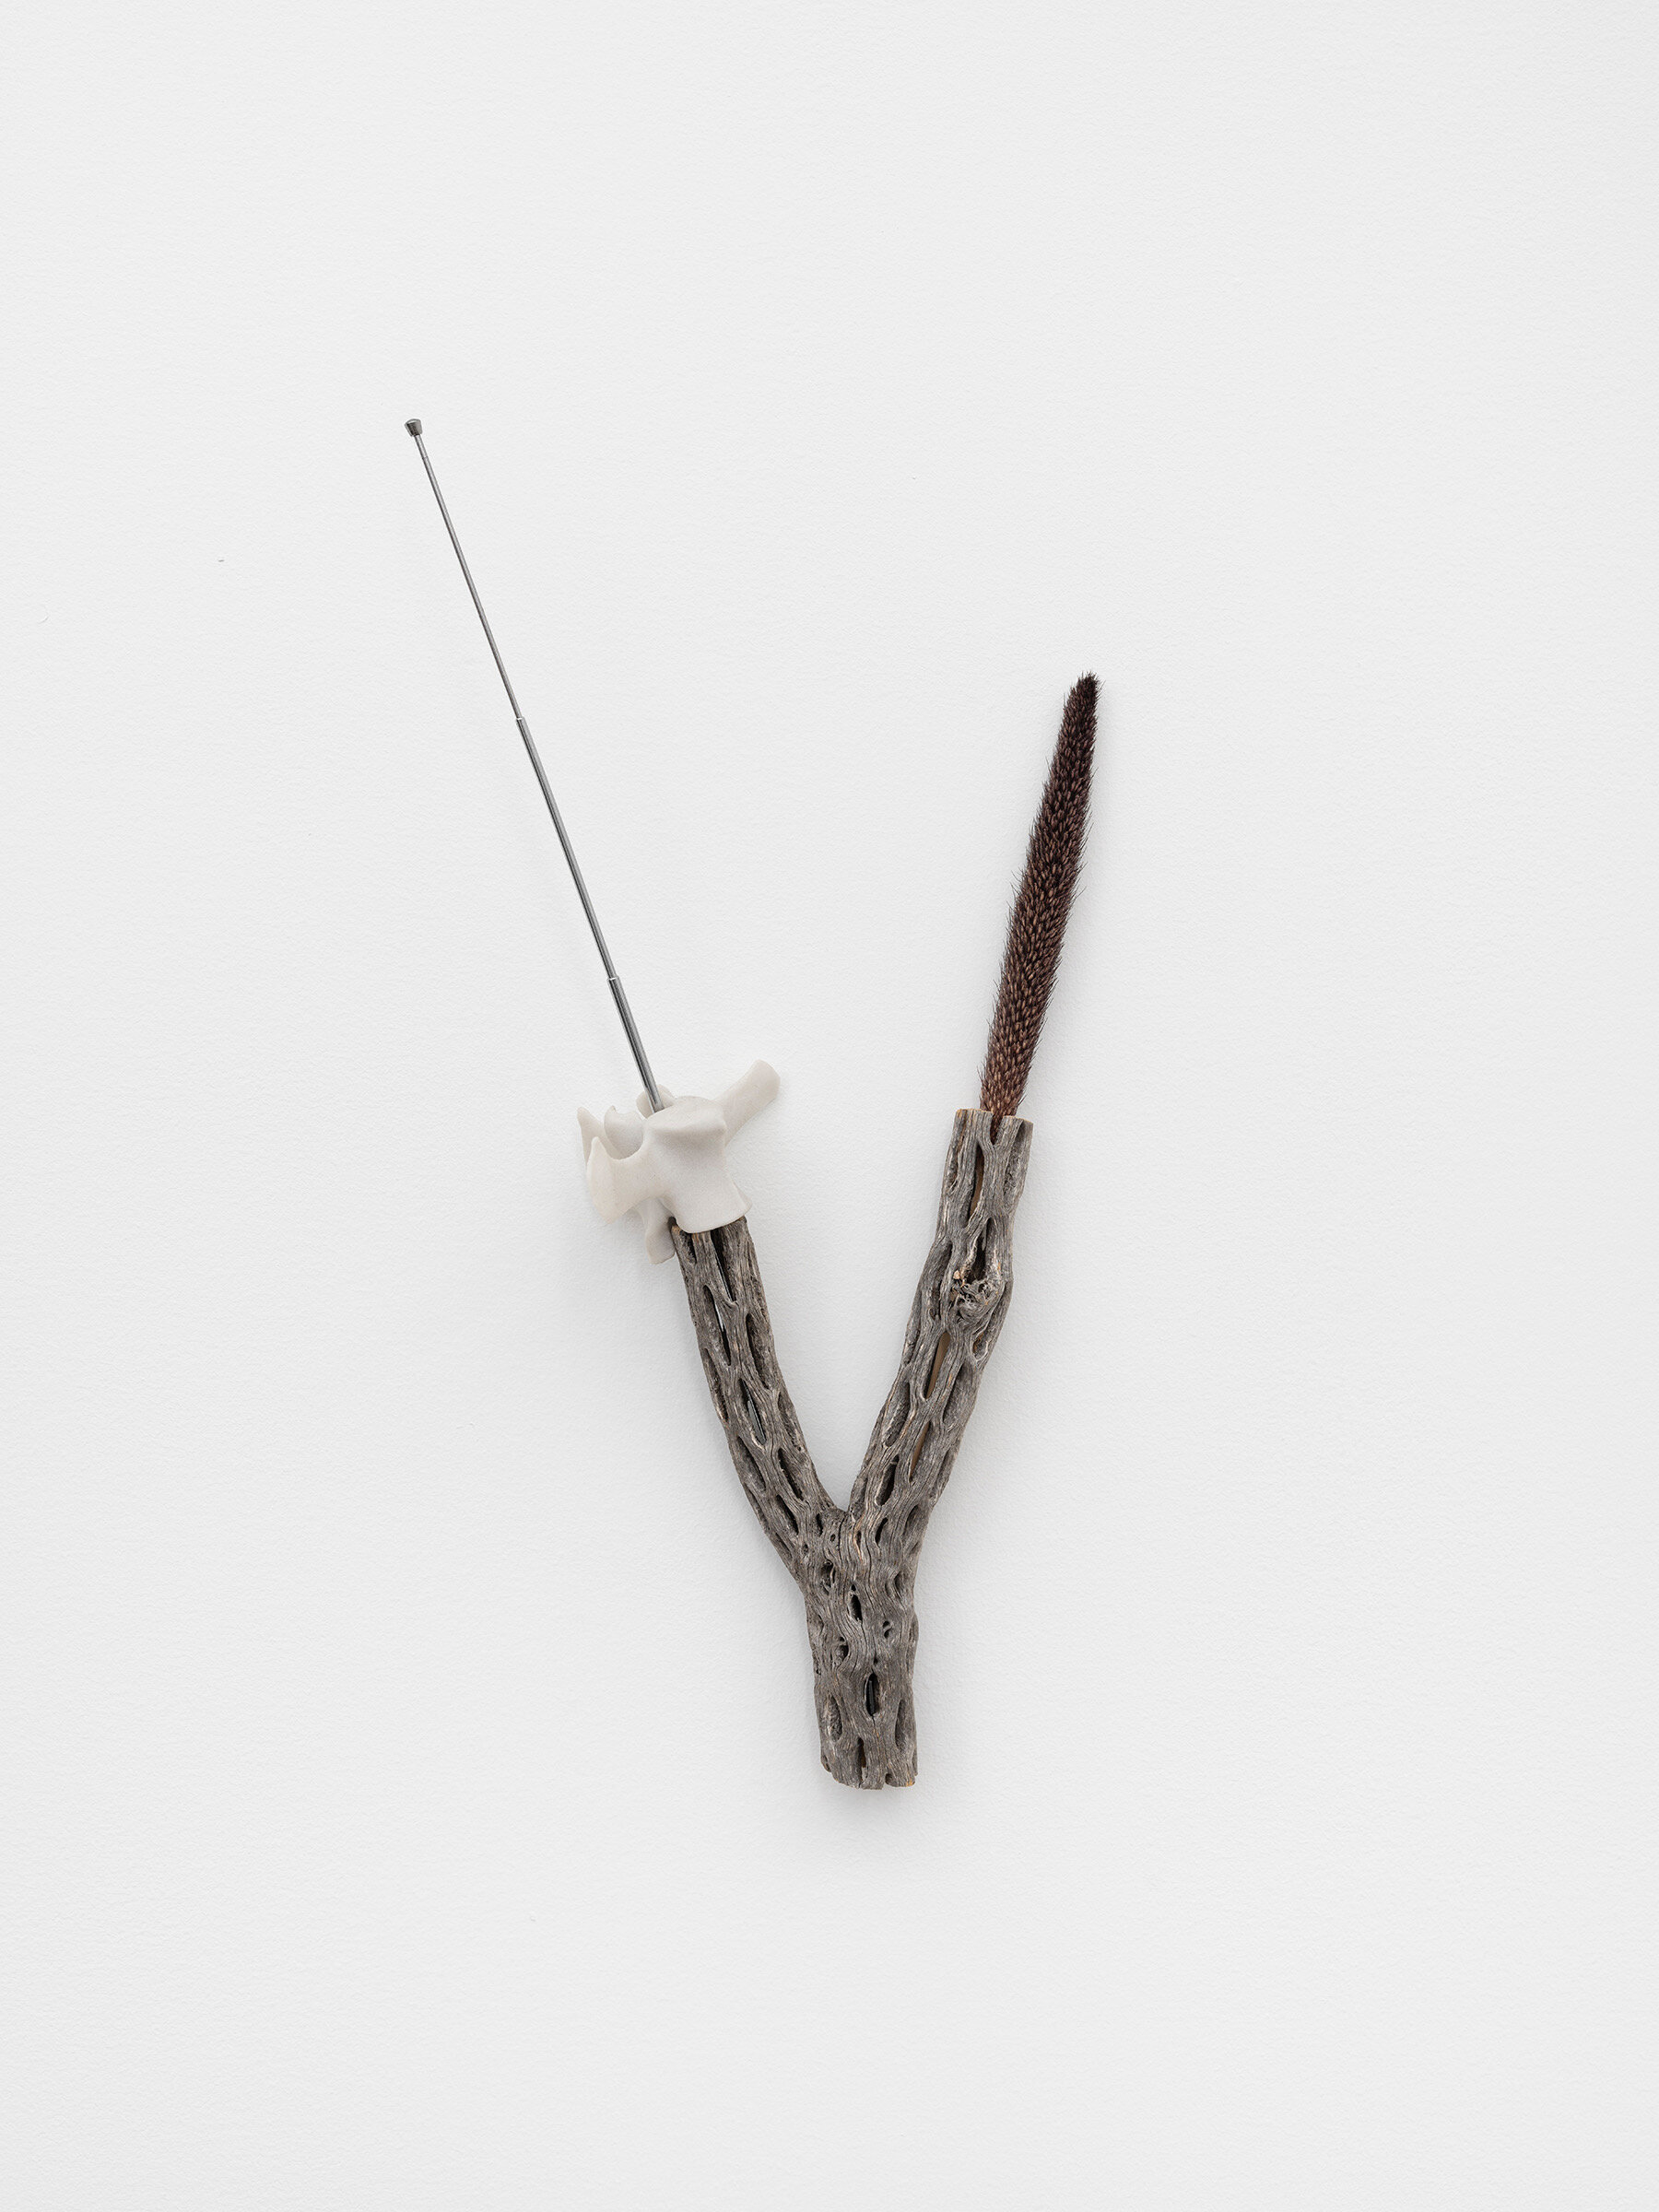  Connor McNicholas  The Many Pieces as Ever , 2020 Polyamide, SD card, wood, pearl millet, antenna, hardware  16 x 8 inches (41 x 20 cm) 